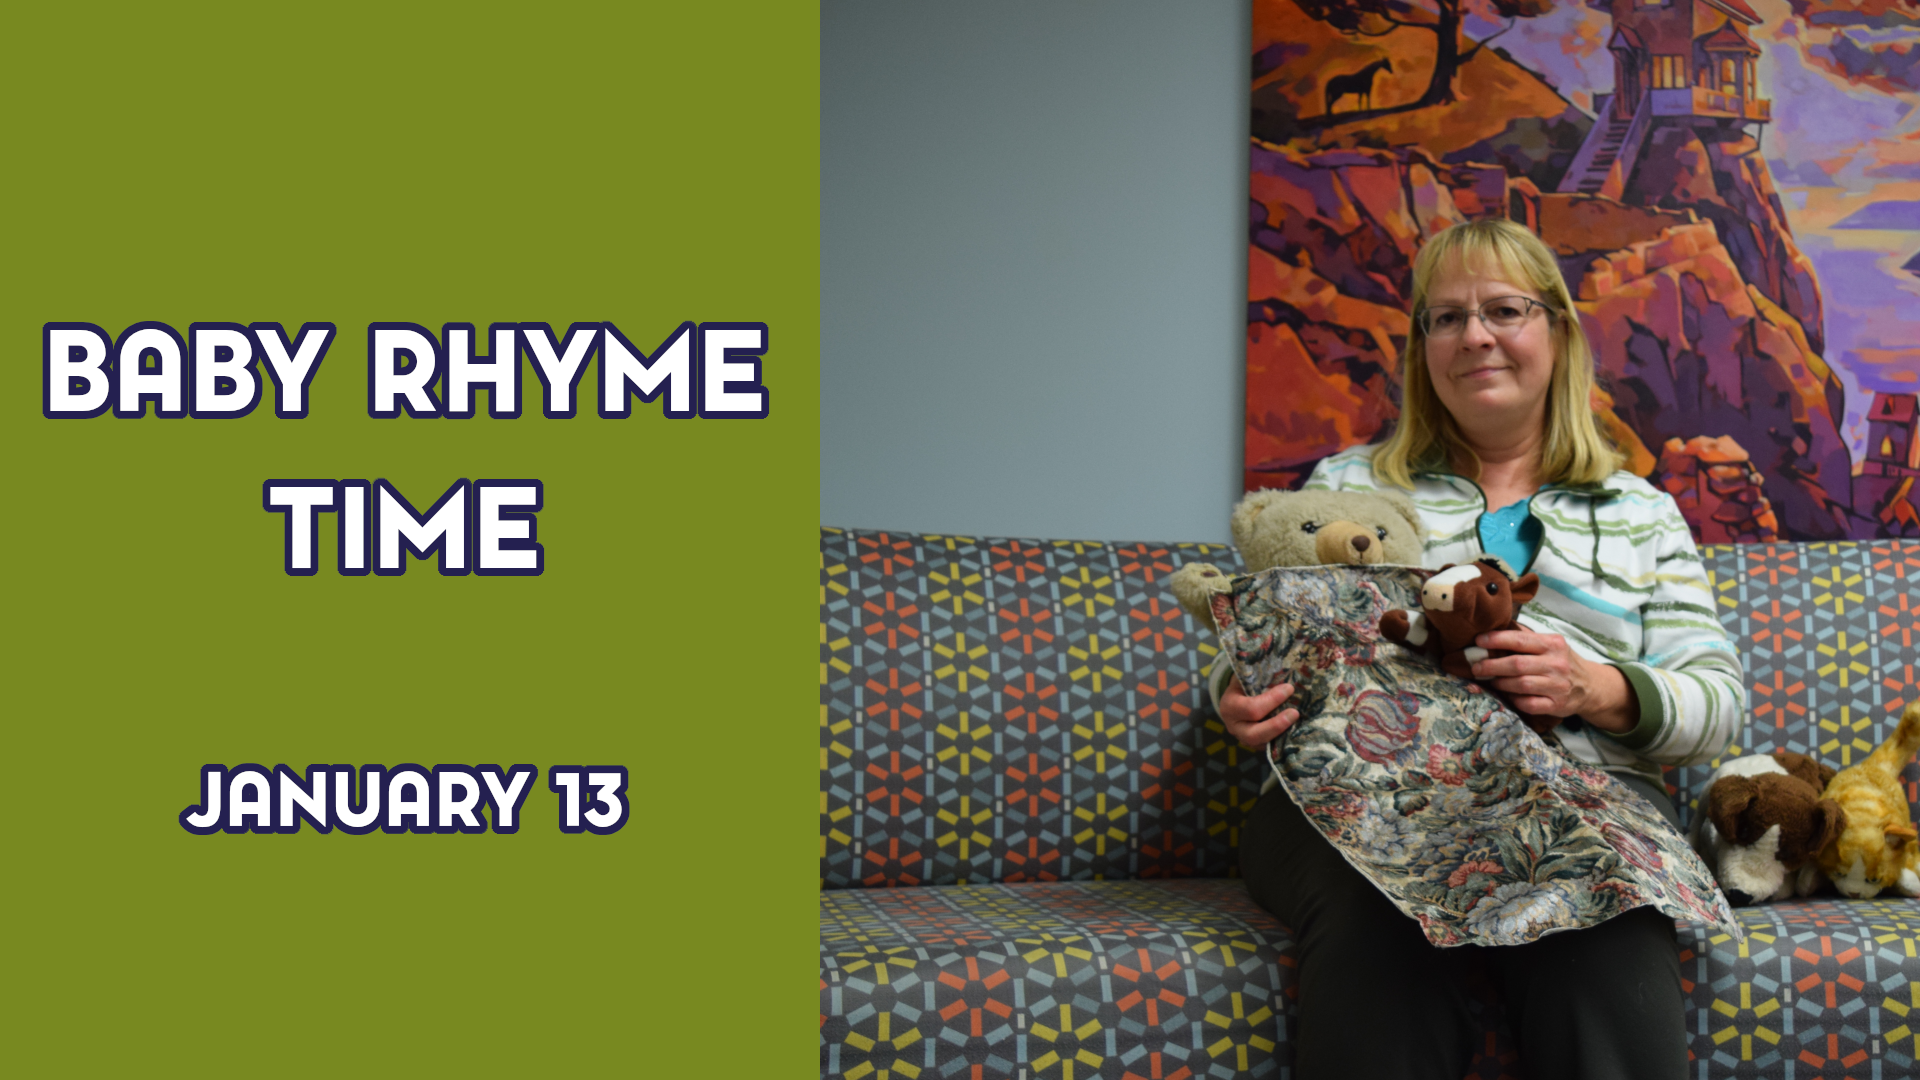 A woman holds a stuffed bear next to the text Baby Rhyme Time January 13